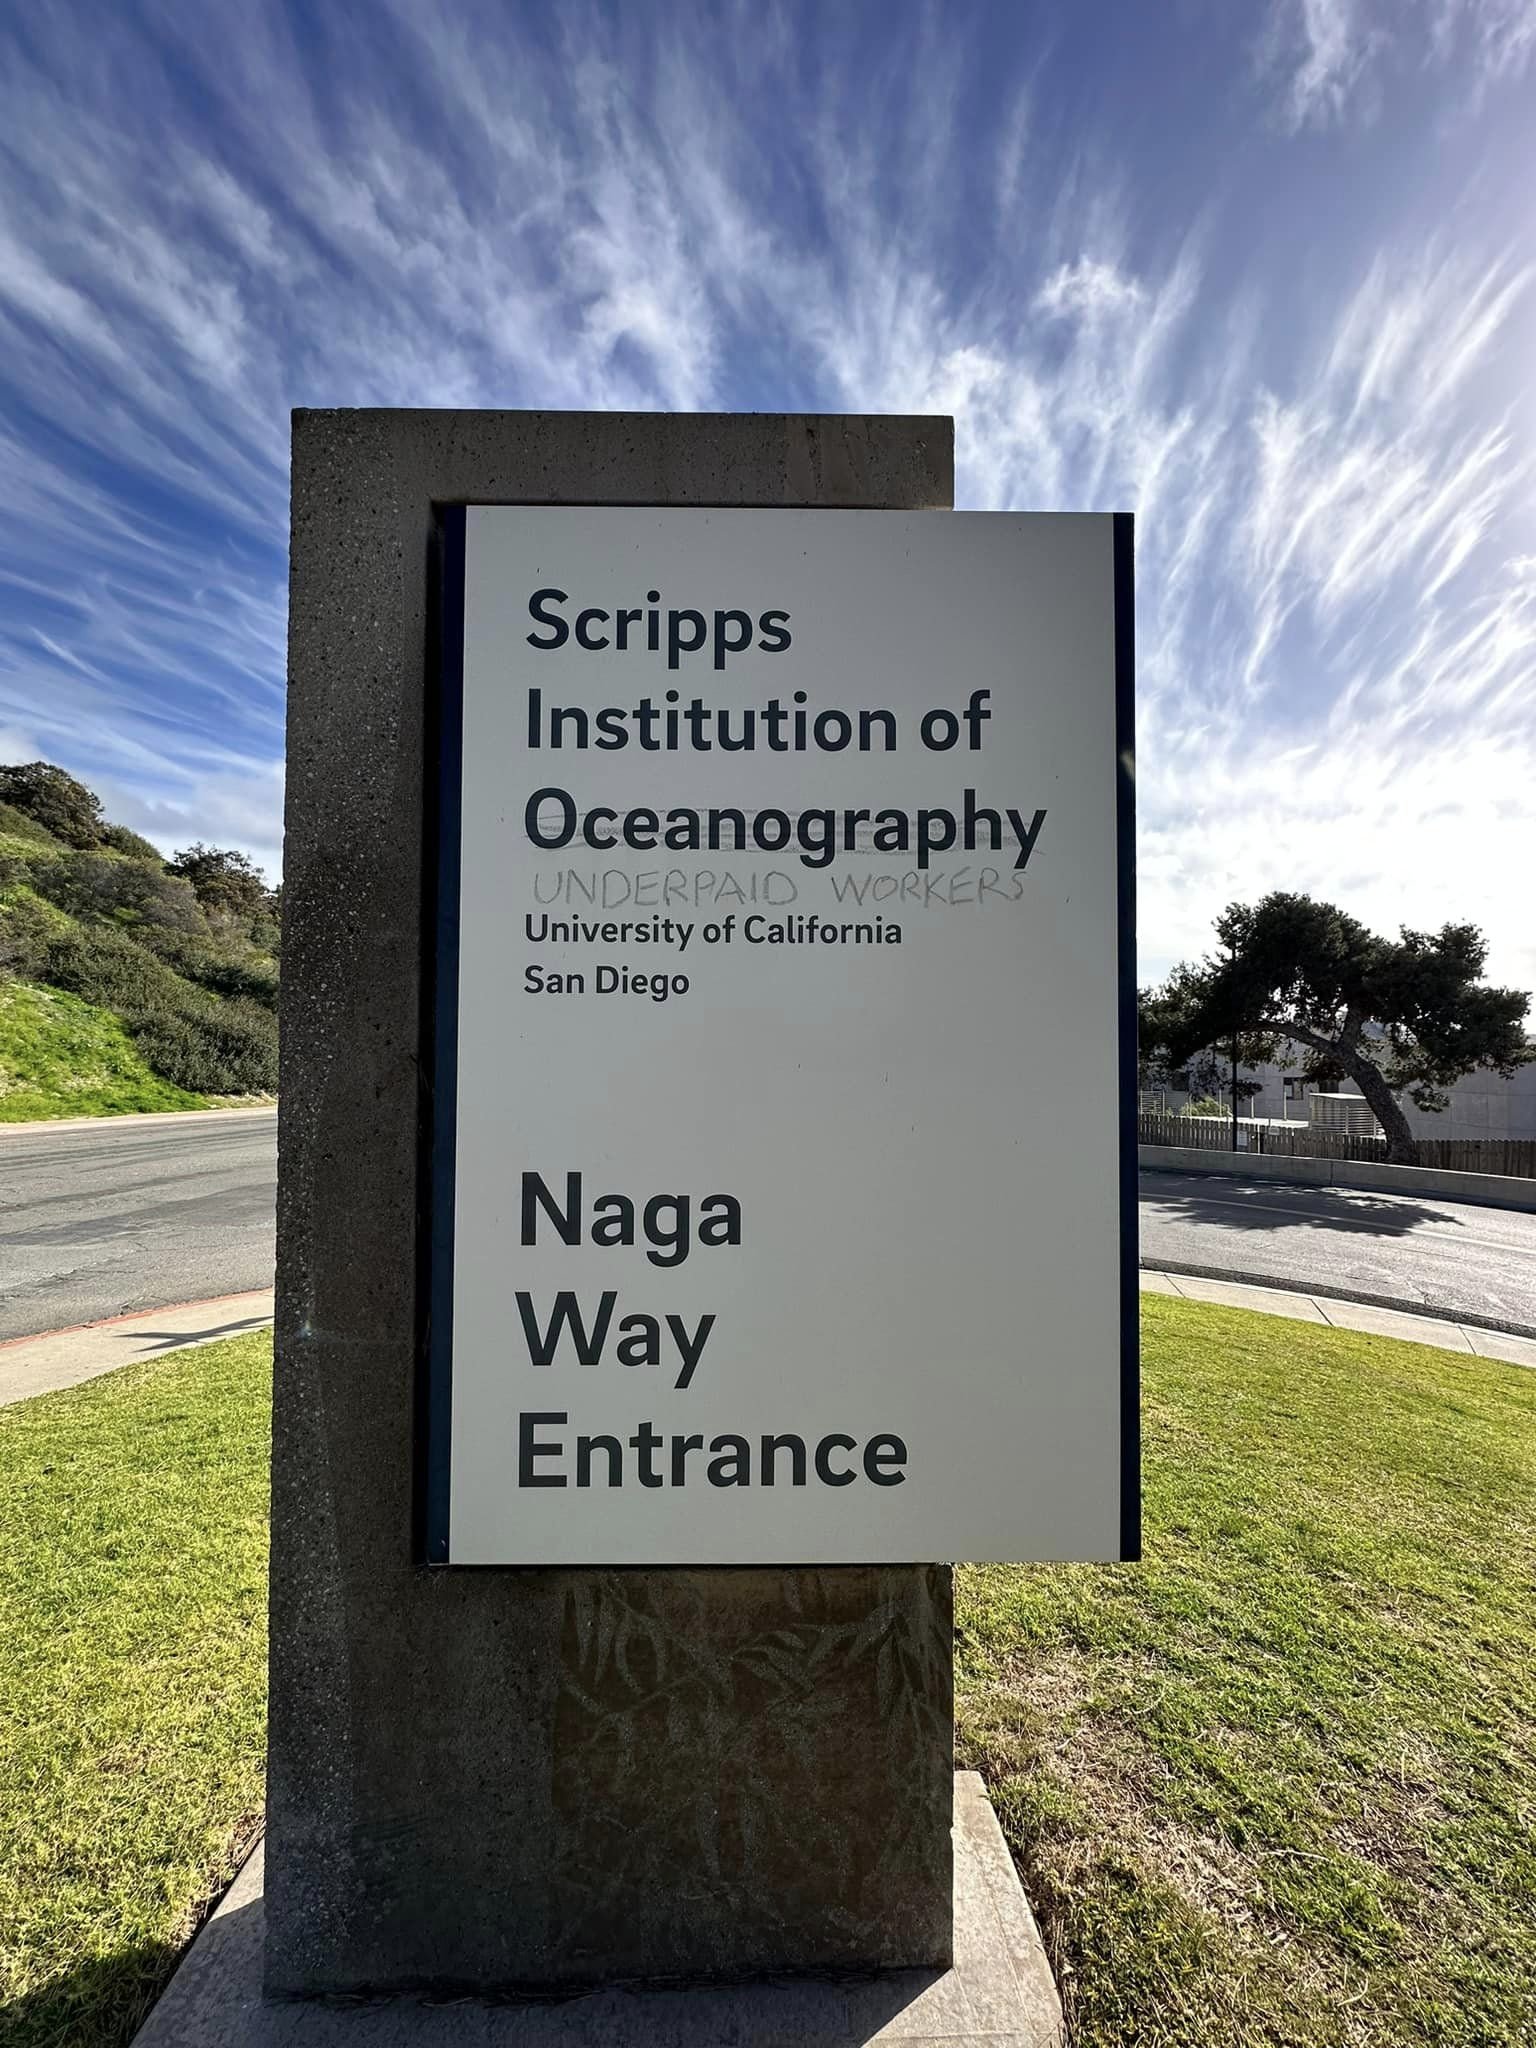  A labor dispute last year in the University of California system, which Scripps is a part of, caused some strong feelings. 